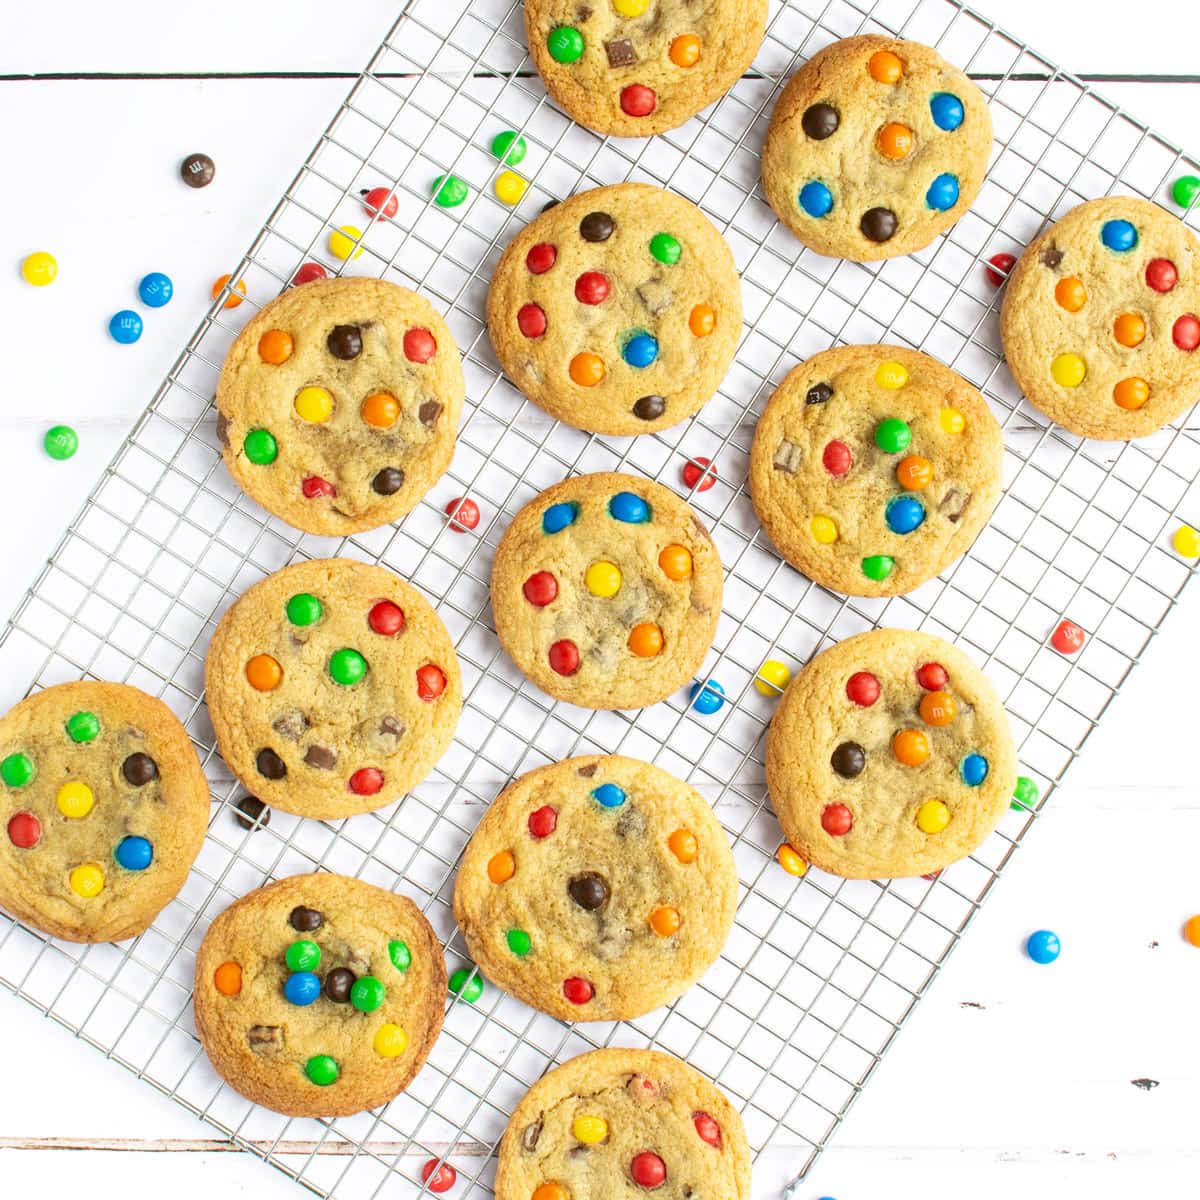 M&Ms Cookies - A twist on my classic chocolate chip cookies with added colour and crunch from M&Ms (or Smarties).